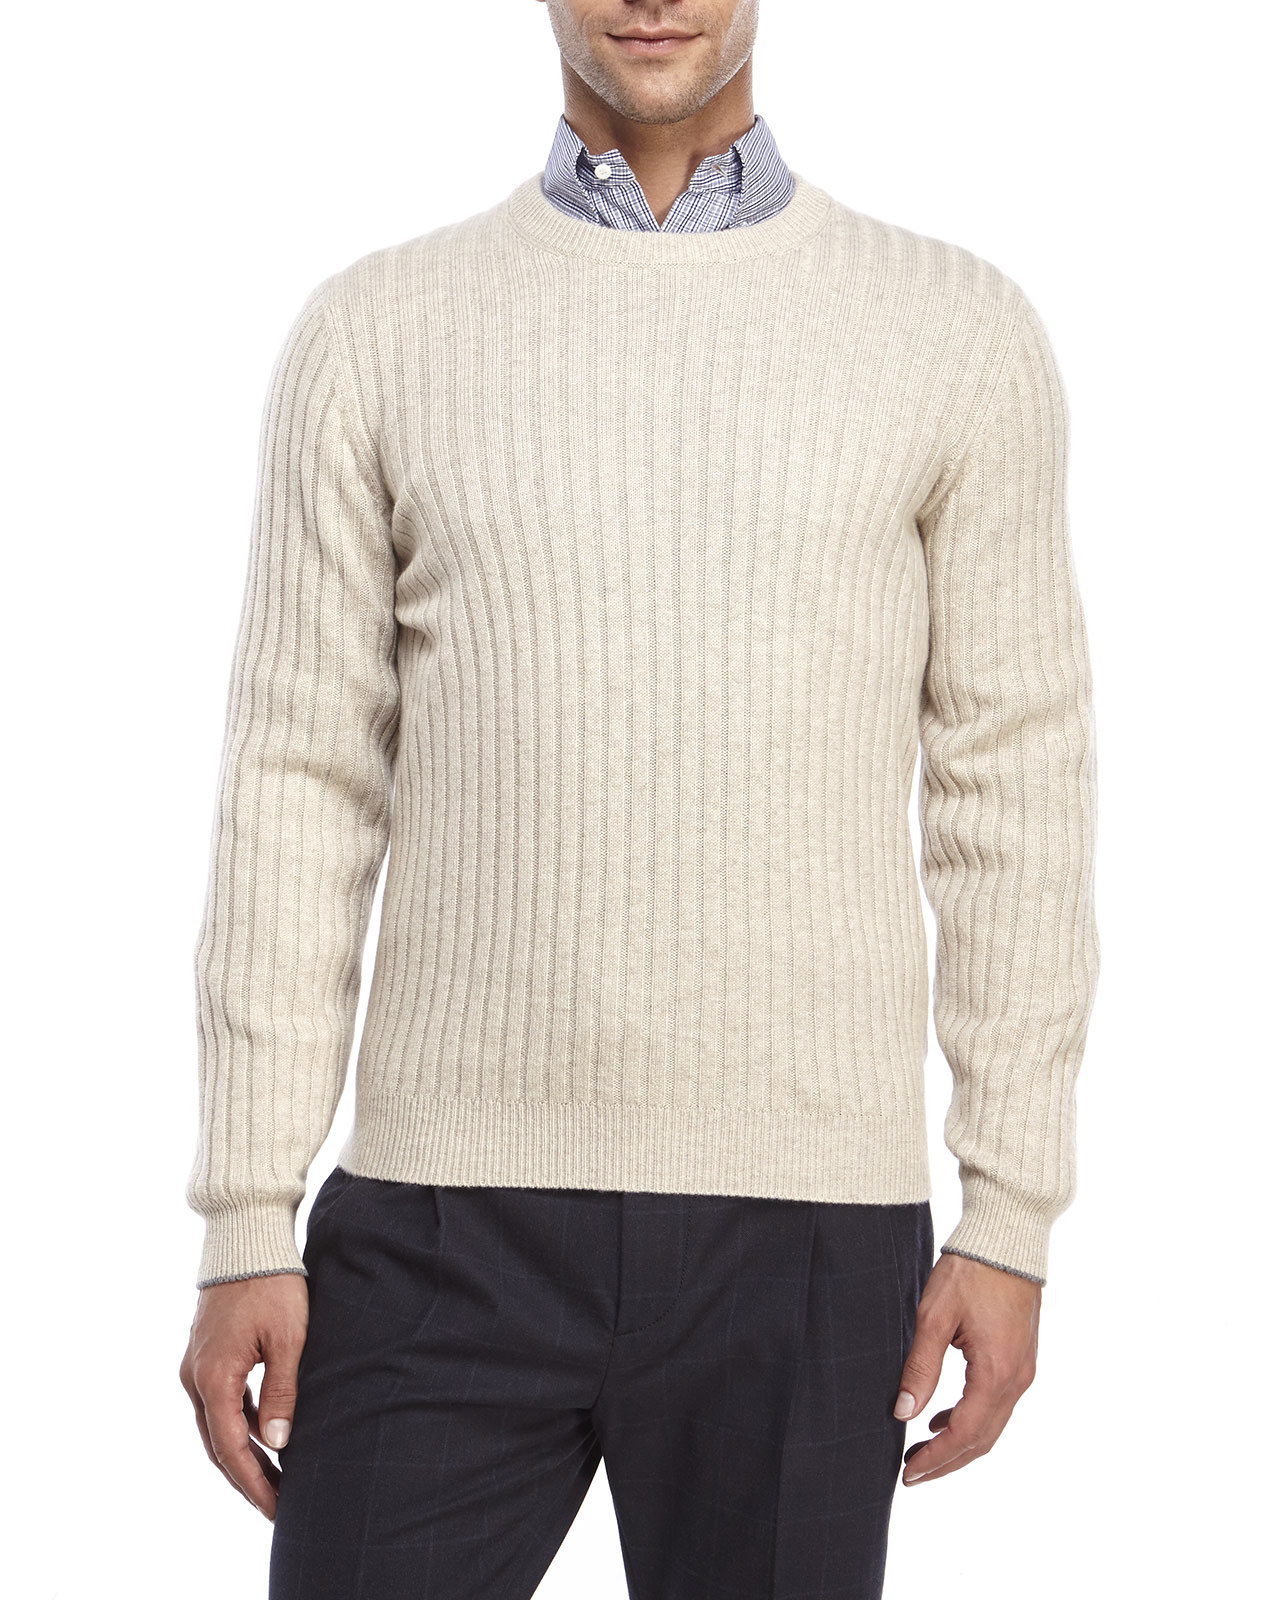 Lyst - Brunello Cucinelli Ribbed Cashmere Sweater in Natural for Men